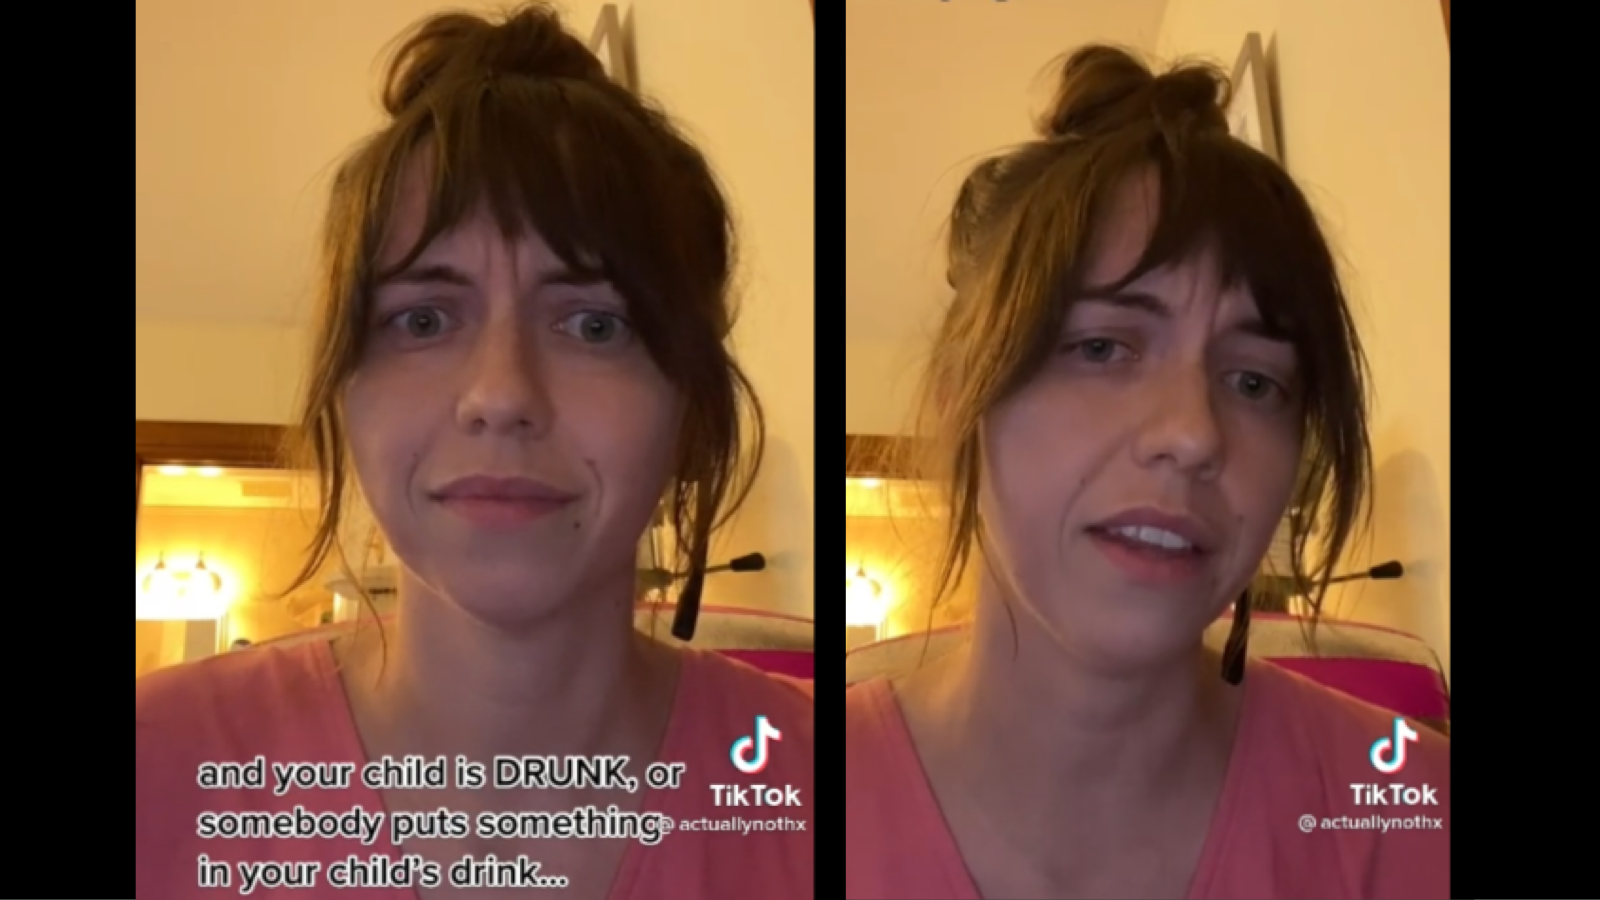 Hannah, known as TikTok user @actuallynothx, takes the bizarre call from a customer complaining about their drunk children and Pride.